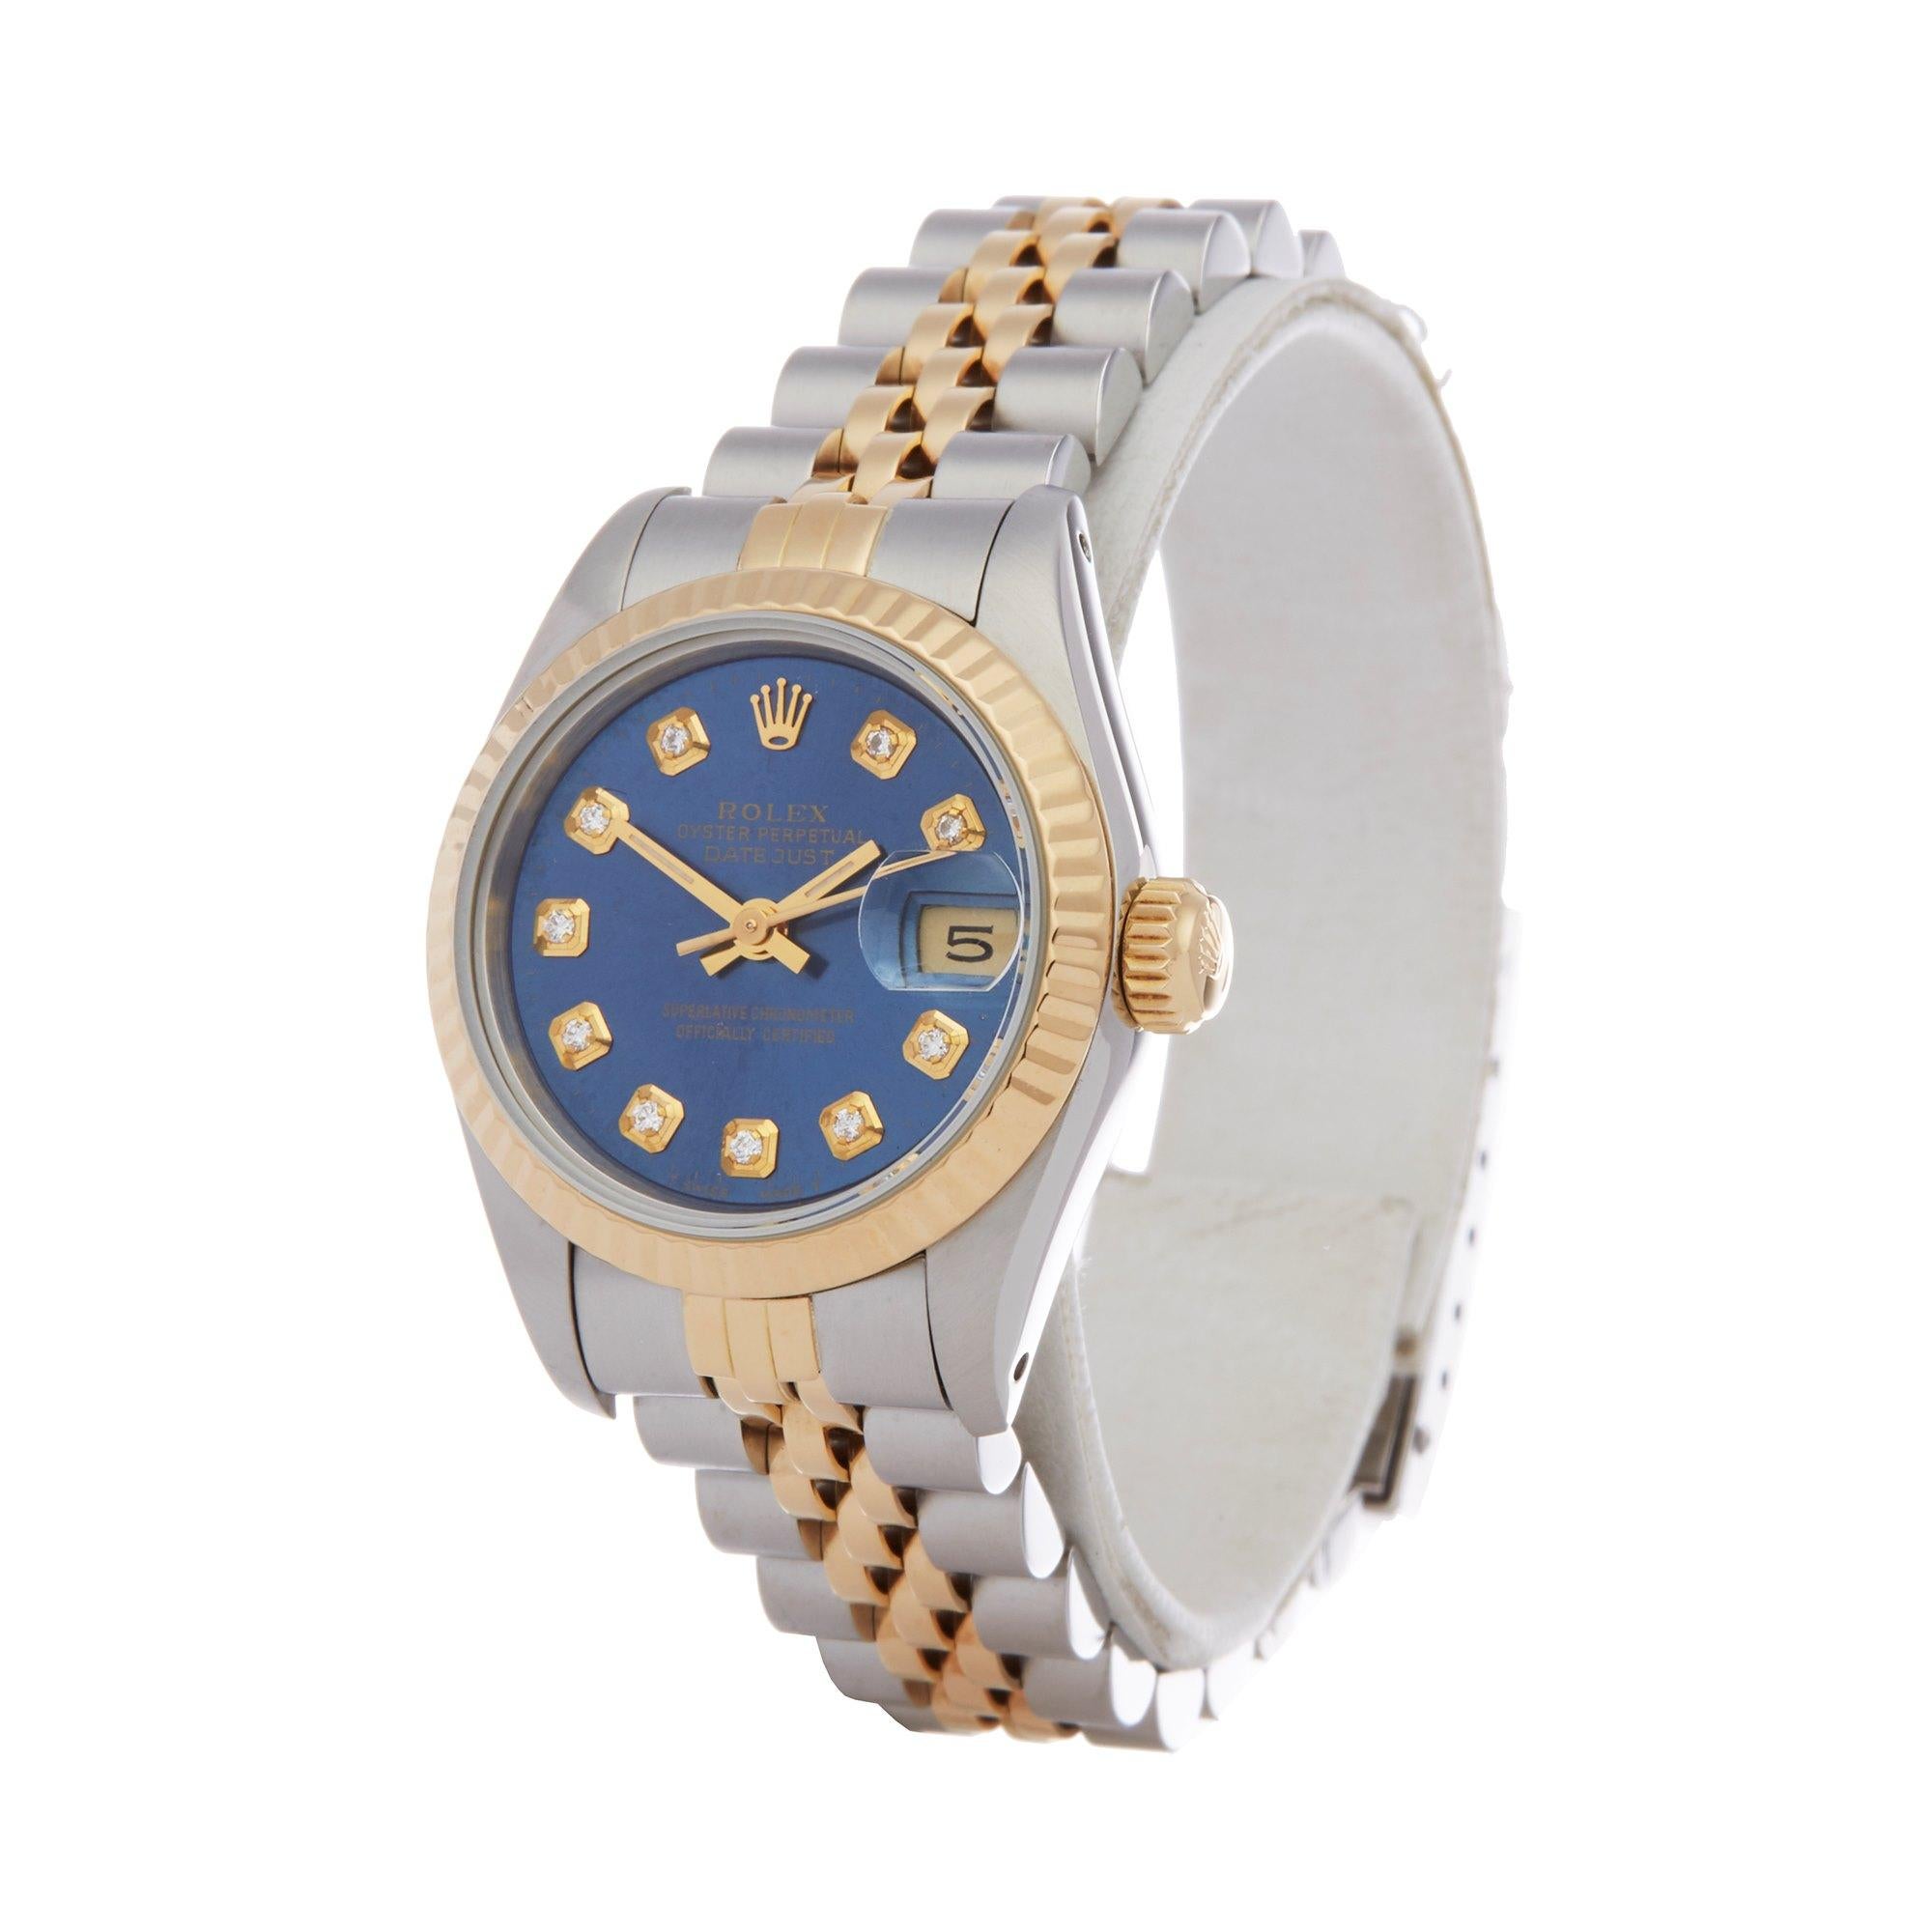 Xupes Reference: W007430
Manufacturer: Rolex
Model: Datejust
Model Variant: 26
Model Number: 69173
Age: 1987
Gender: Ladies
Complete With: Rolex Box
Dial: Blue Graduated With Diamond Markers
Glass: Sapphire Crystal
Case Size: 26mm
Case Material: